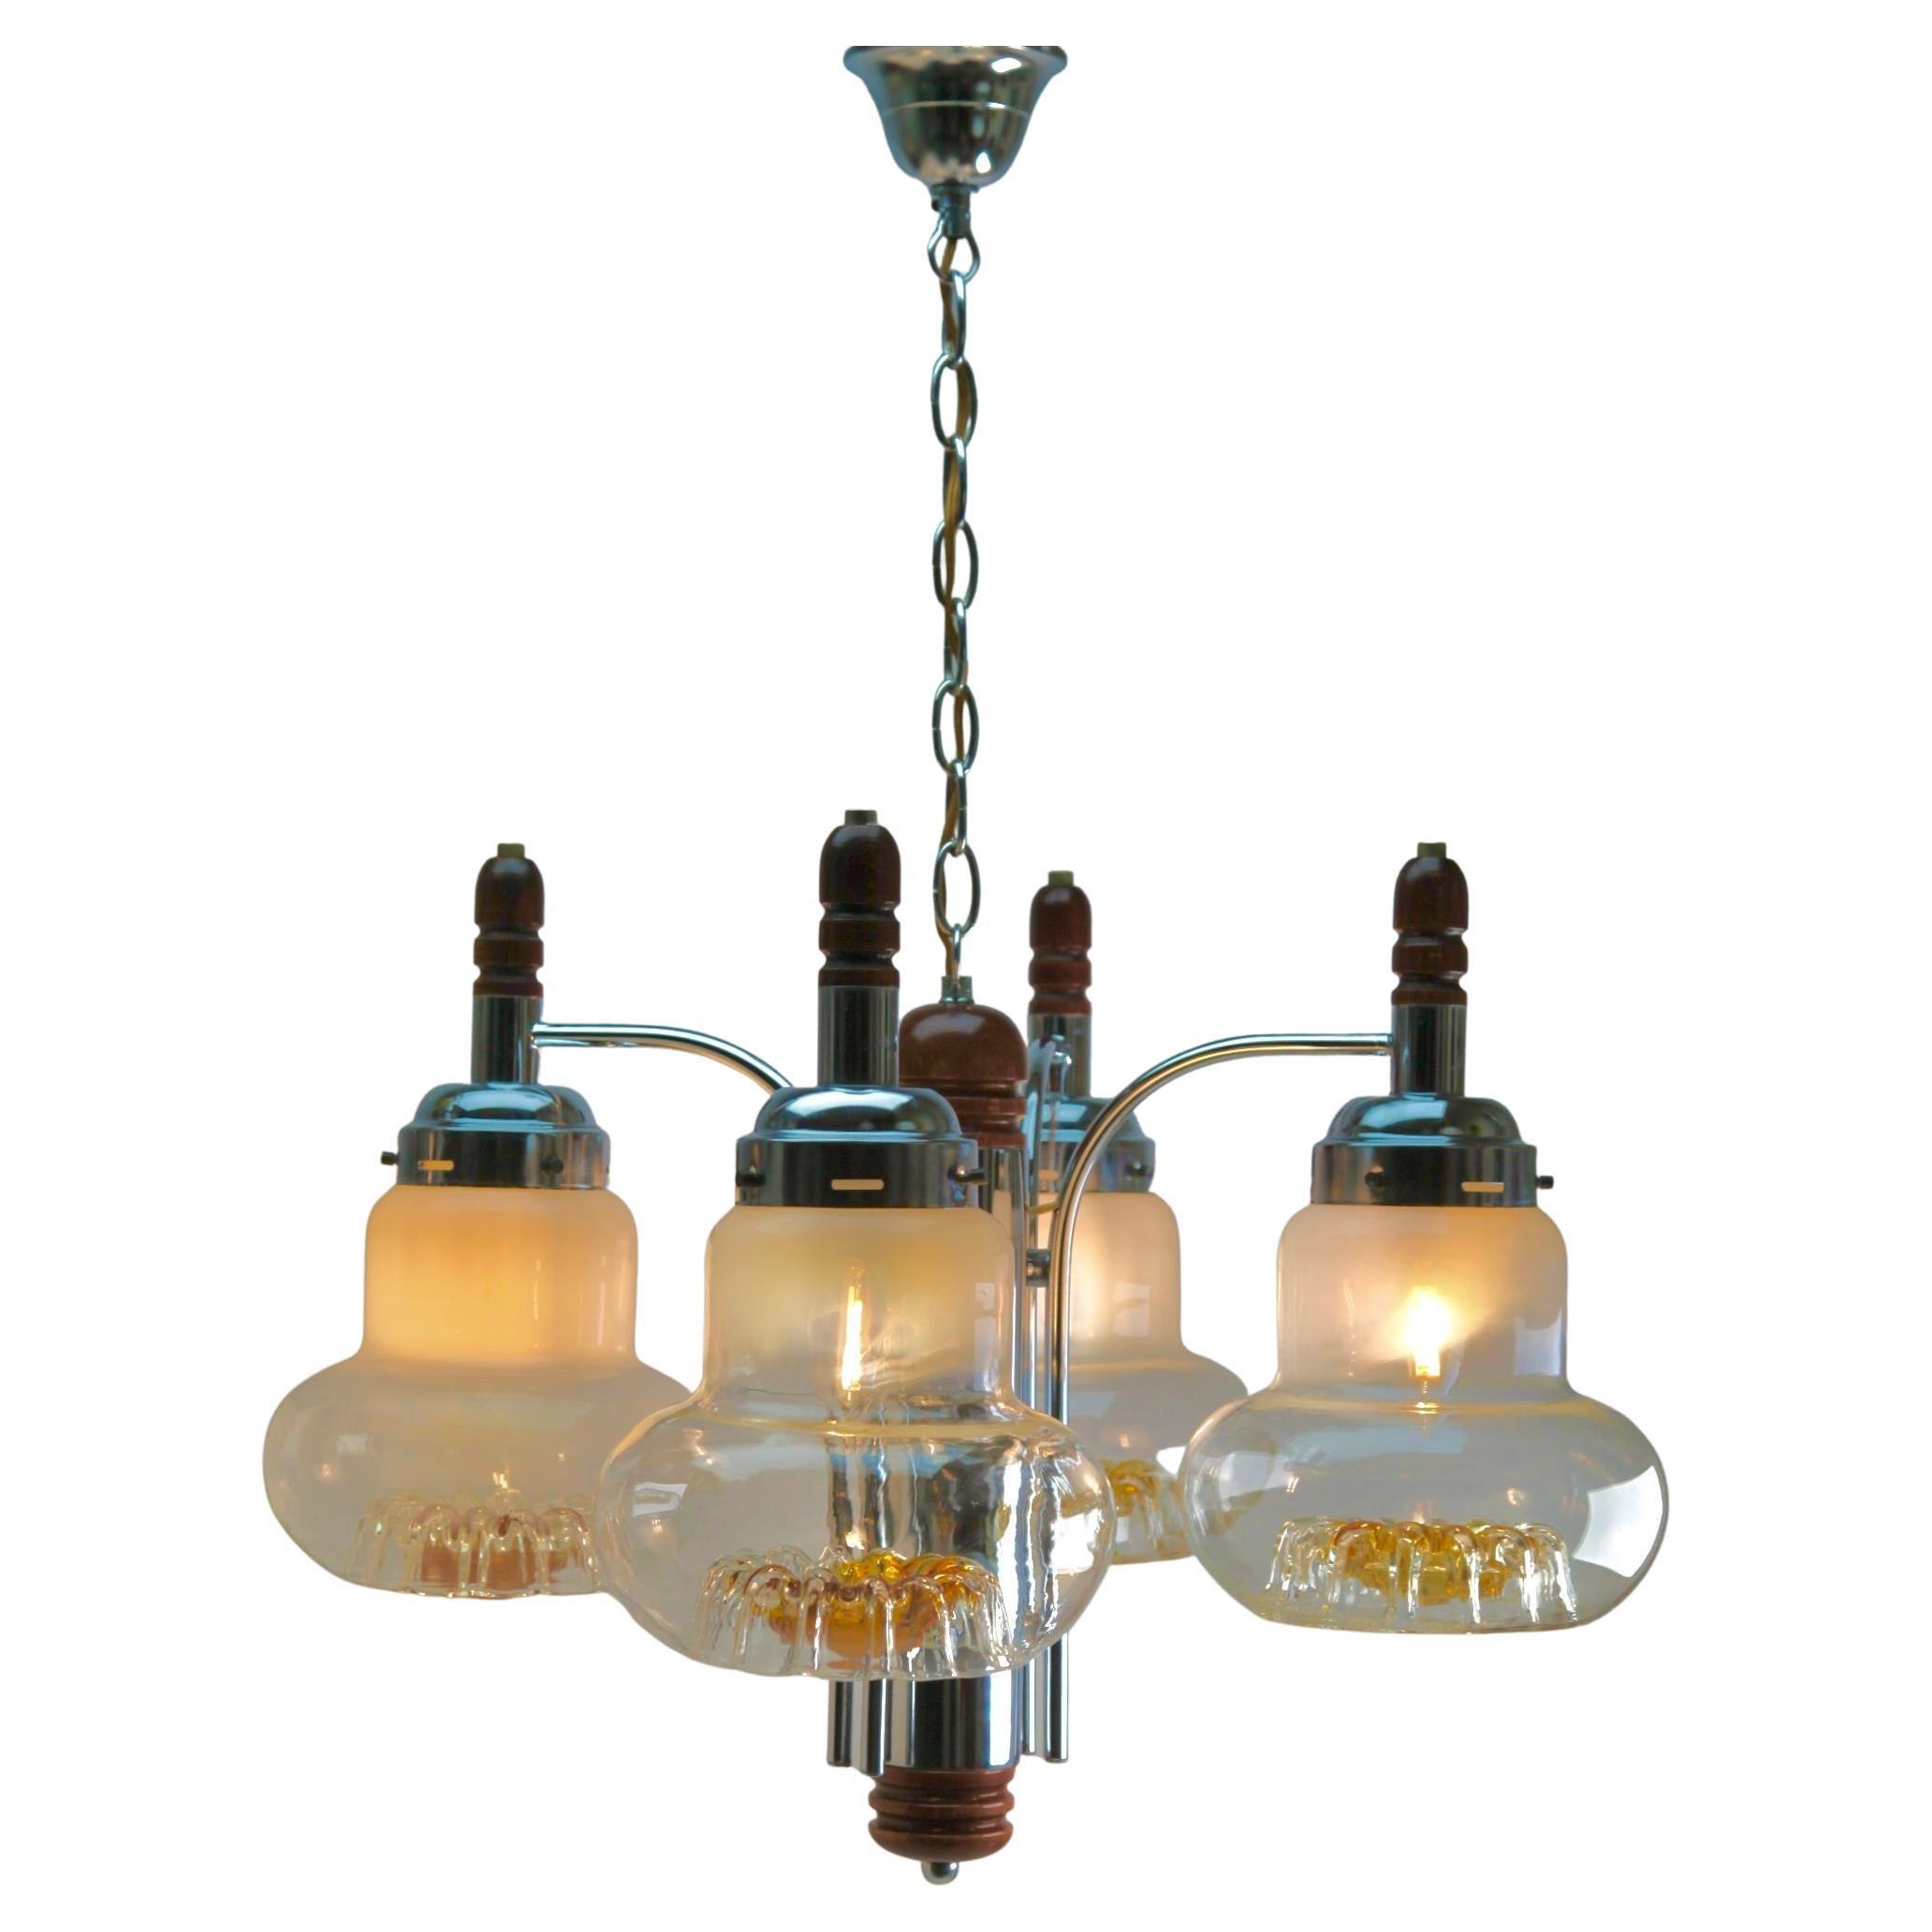 Pendant by Mazzega with 4 Globes of Clear Glass with Orange Inclusions